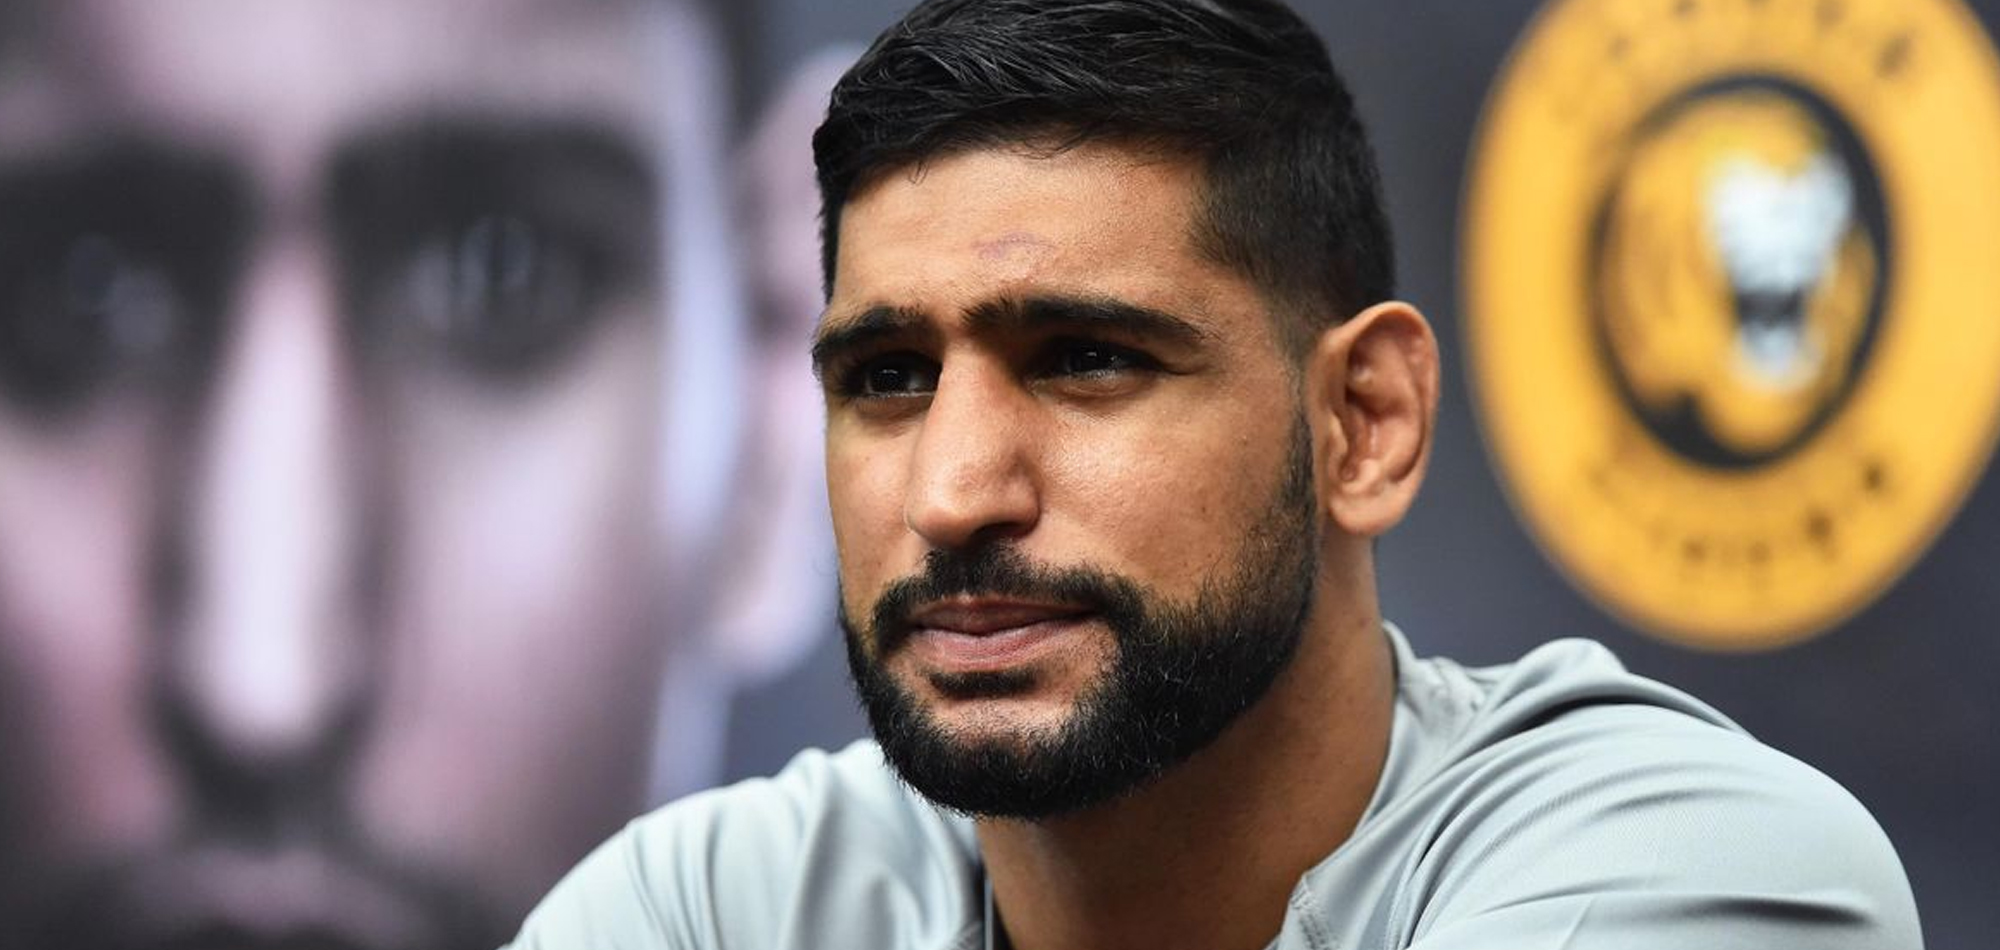 EX-WORLD CHAMPION AMIR KHAN RETIRES FROM BOXING